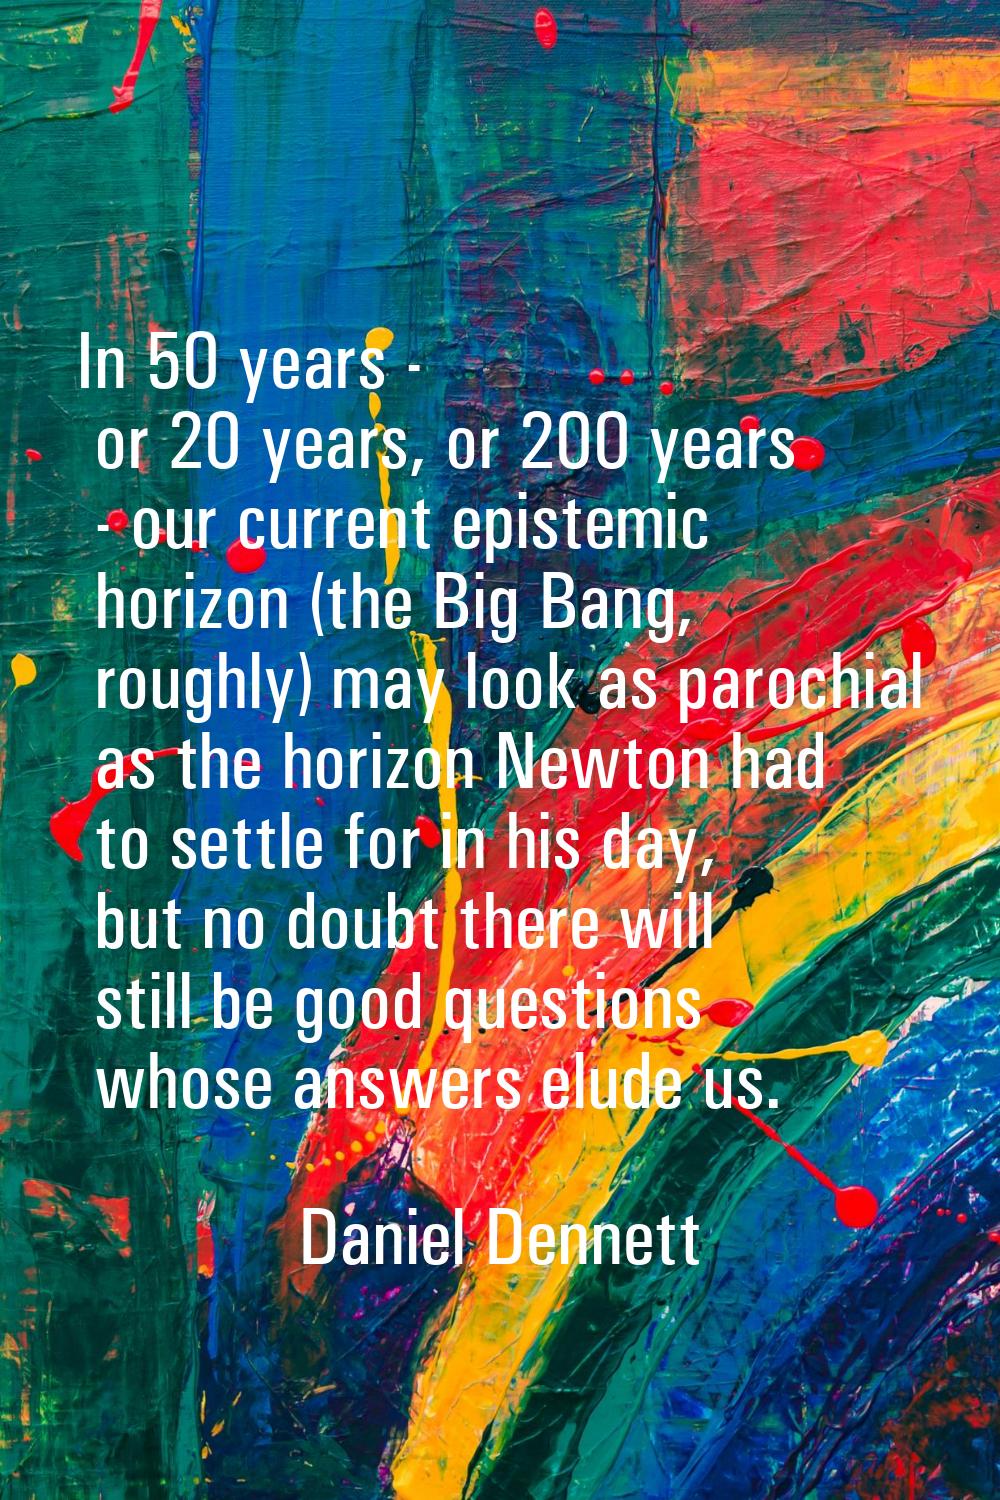 In 50 years - or 20 years, or 200 years - our current epistemic horizon (the Big Bang, roughly) may